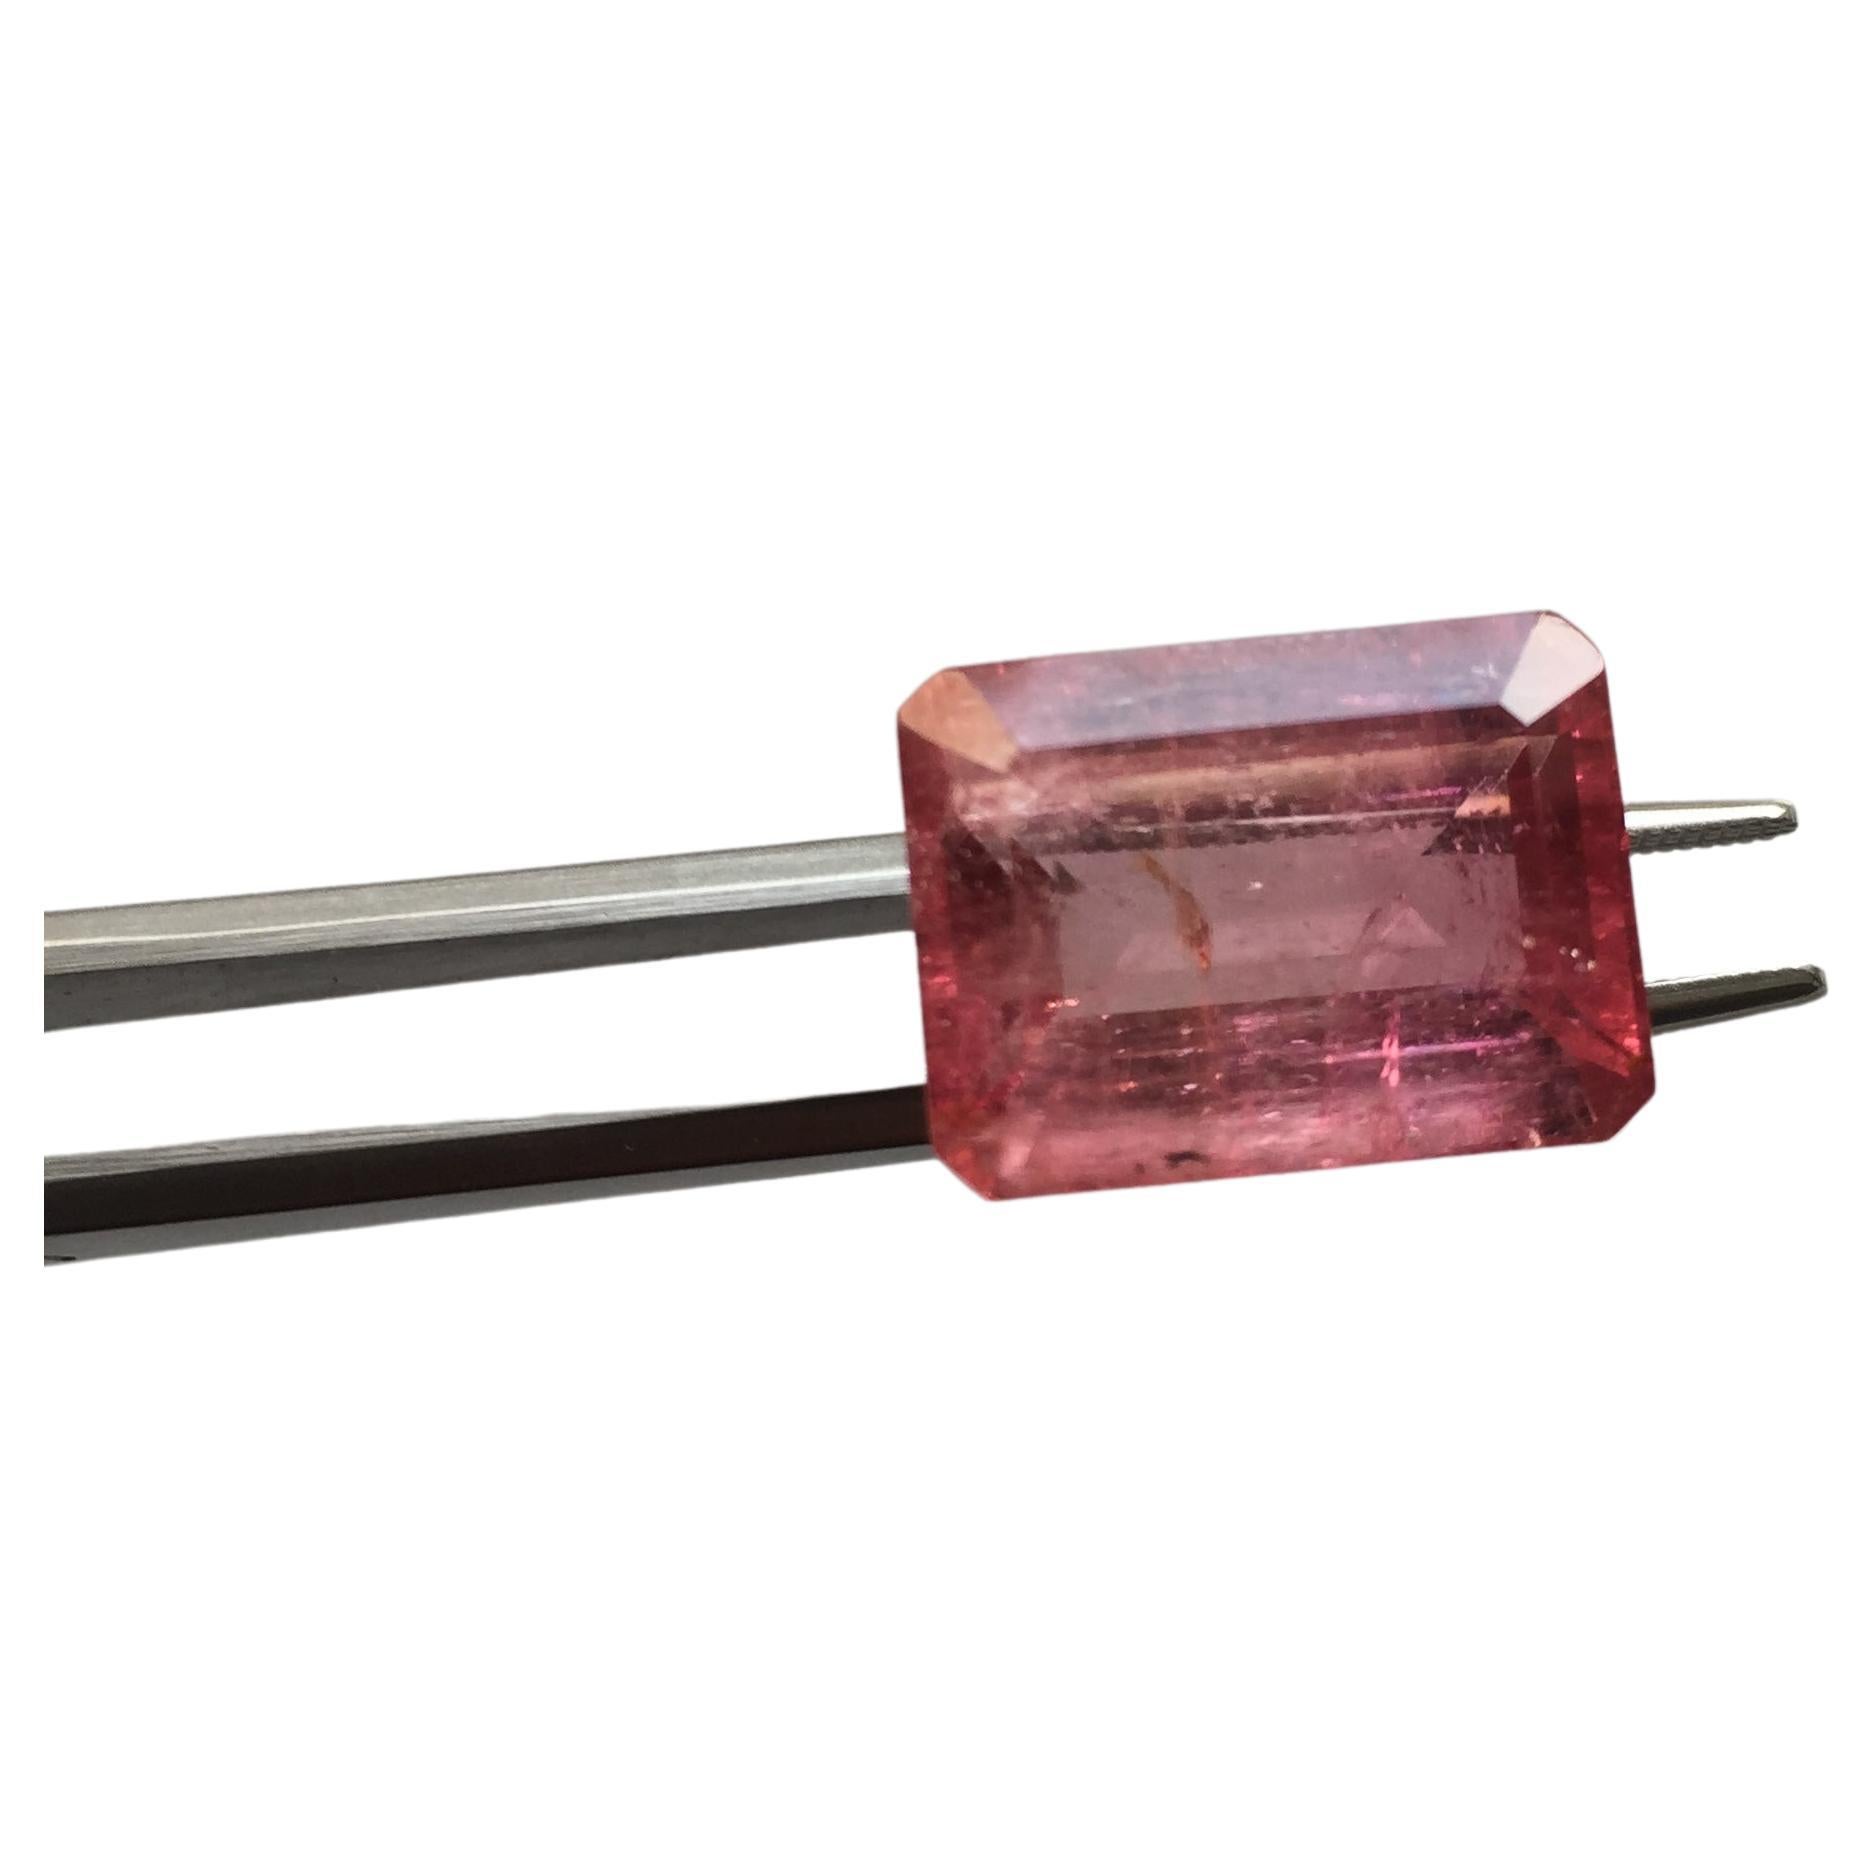 This stunning gemstone features a gorgeous pink hue that is sure to make a statement. The octagon cut of the gemstone adds a touch of elegance and sophistication, making it ideal for those looking for a unique and eye-catching piece of jewelry.

Our